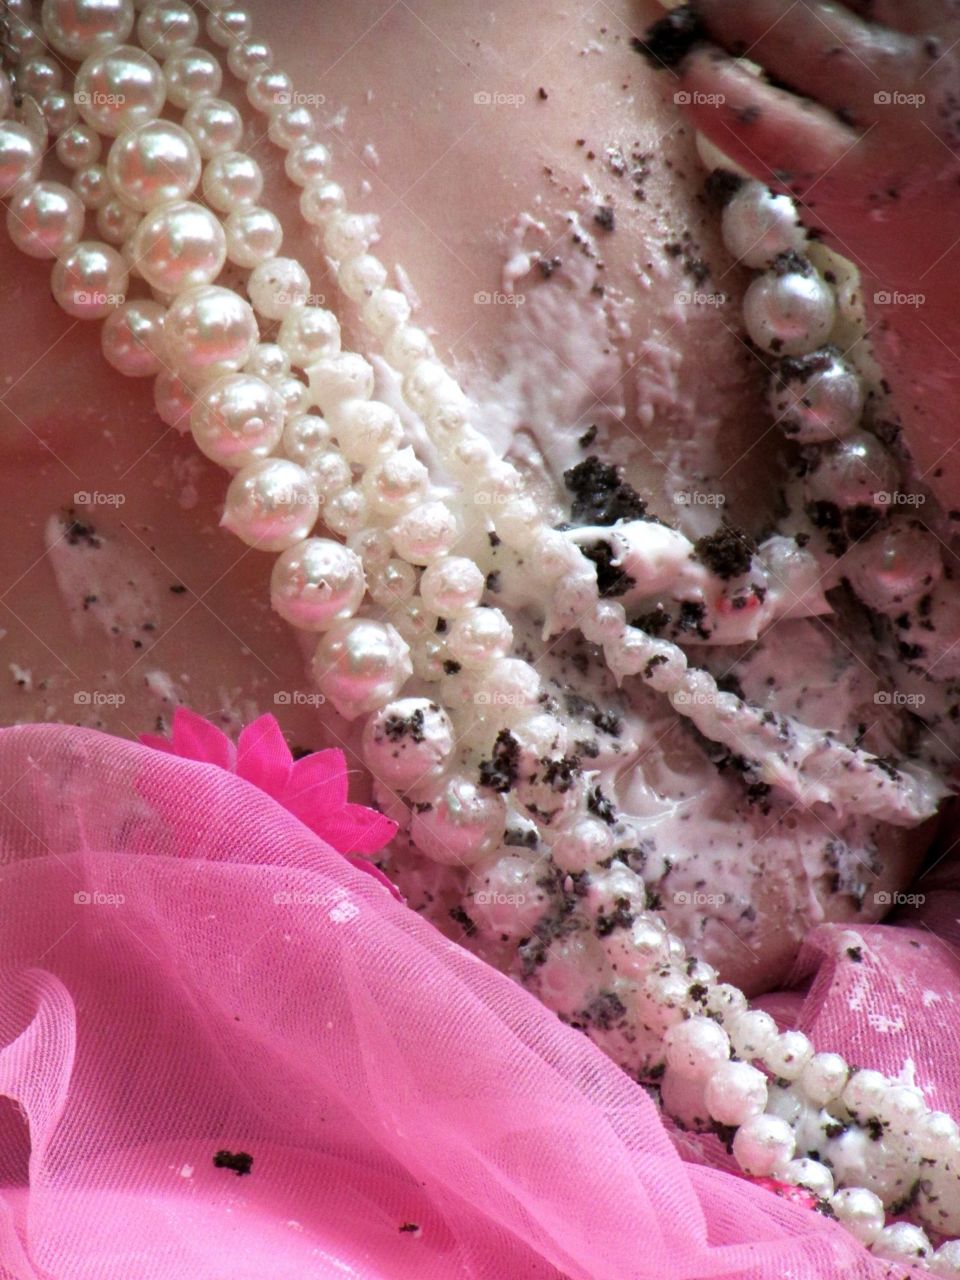 Cake and Pearls